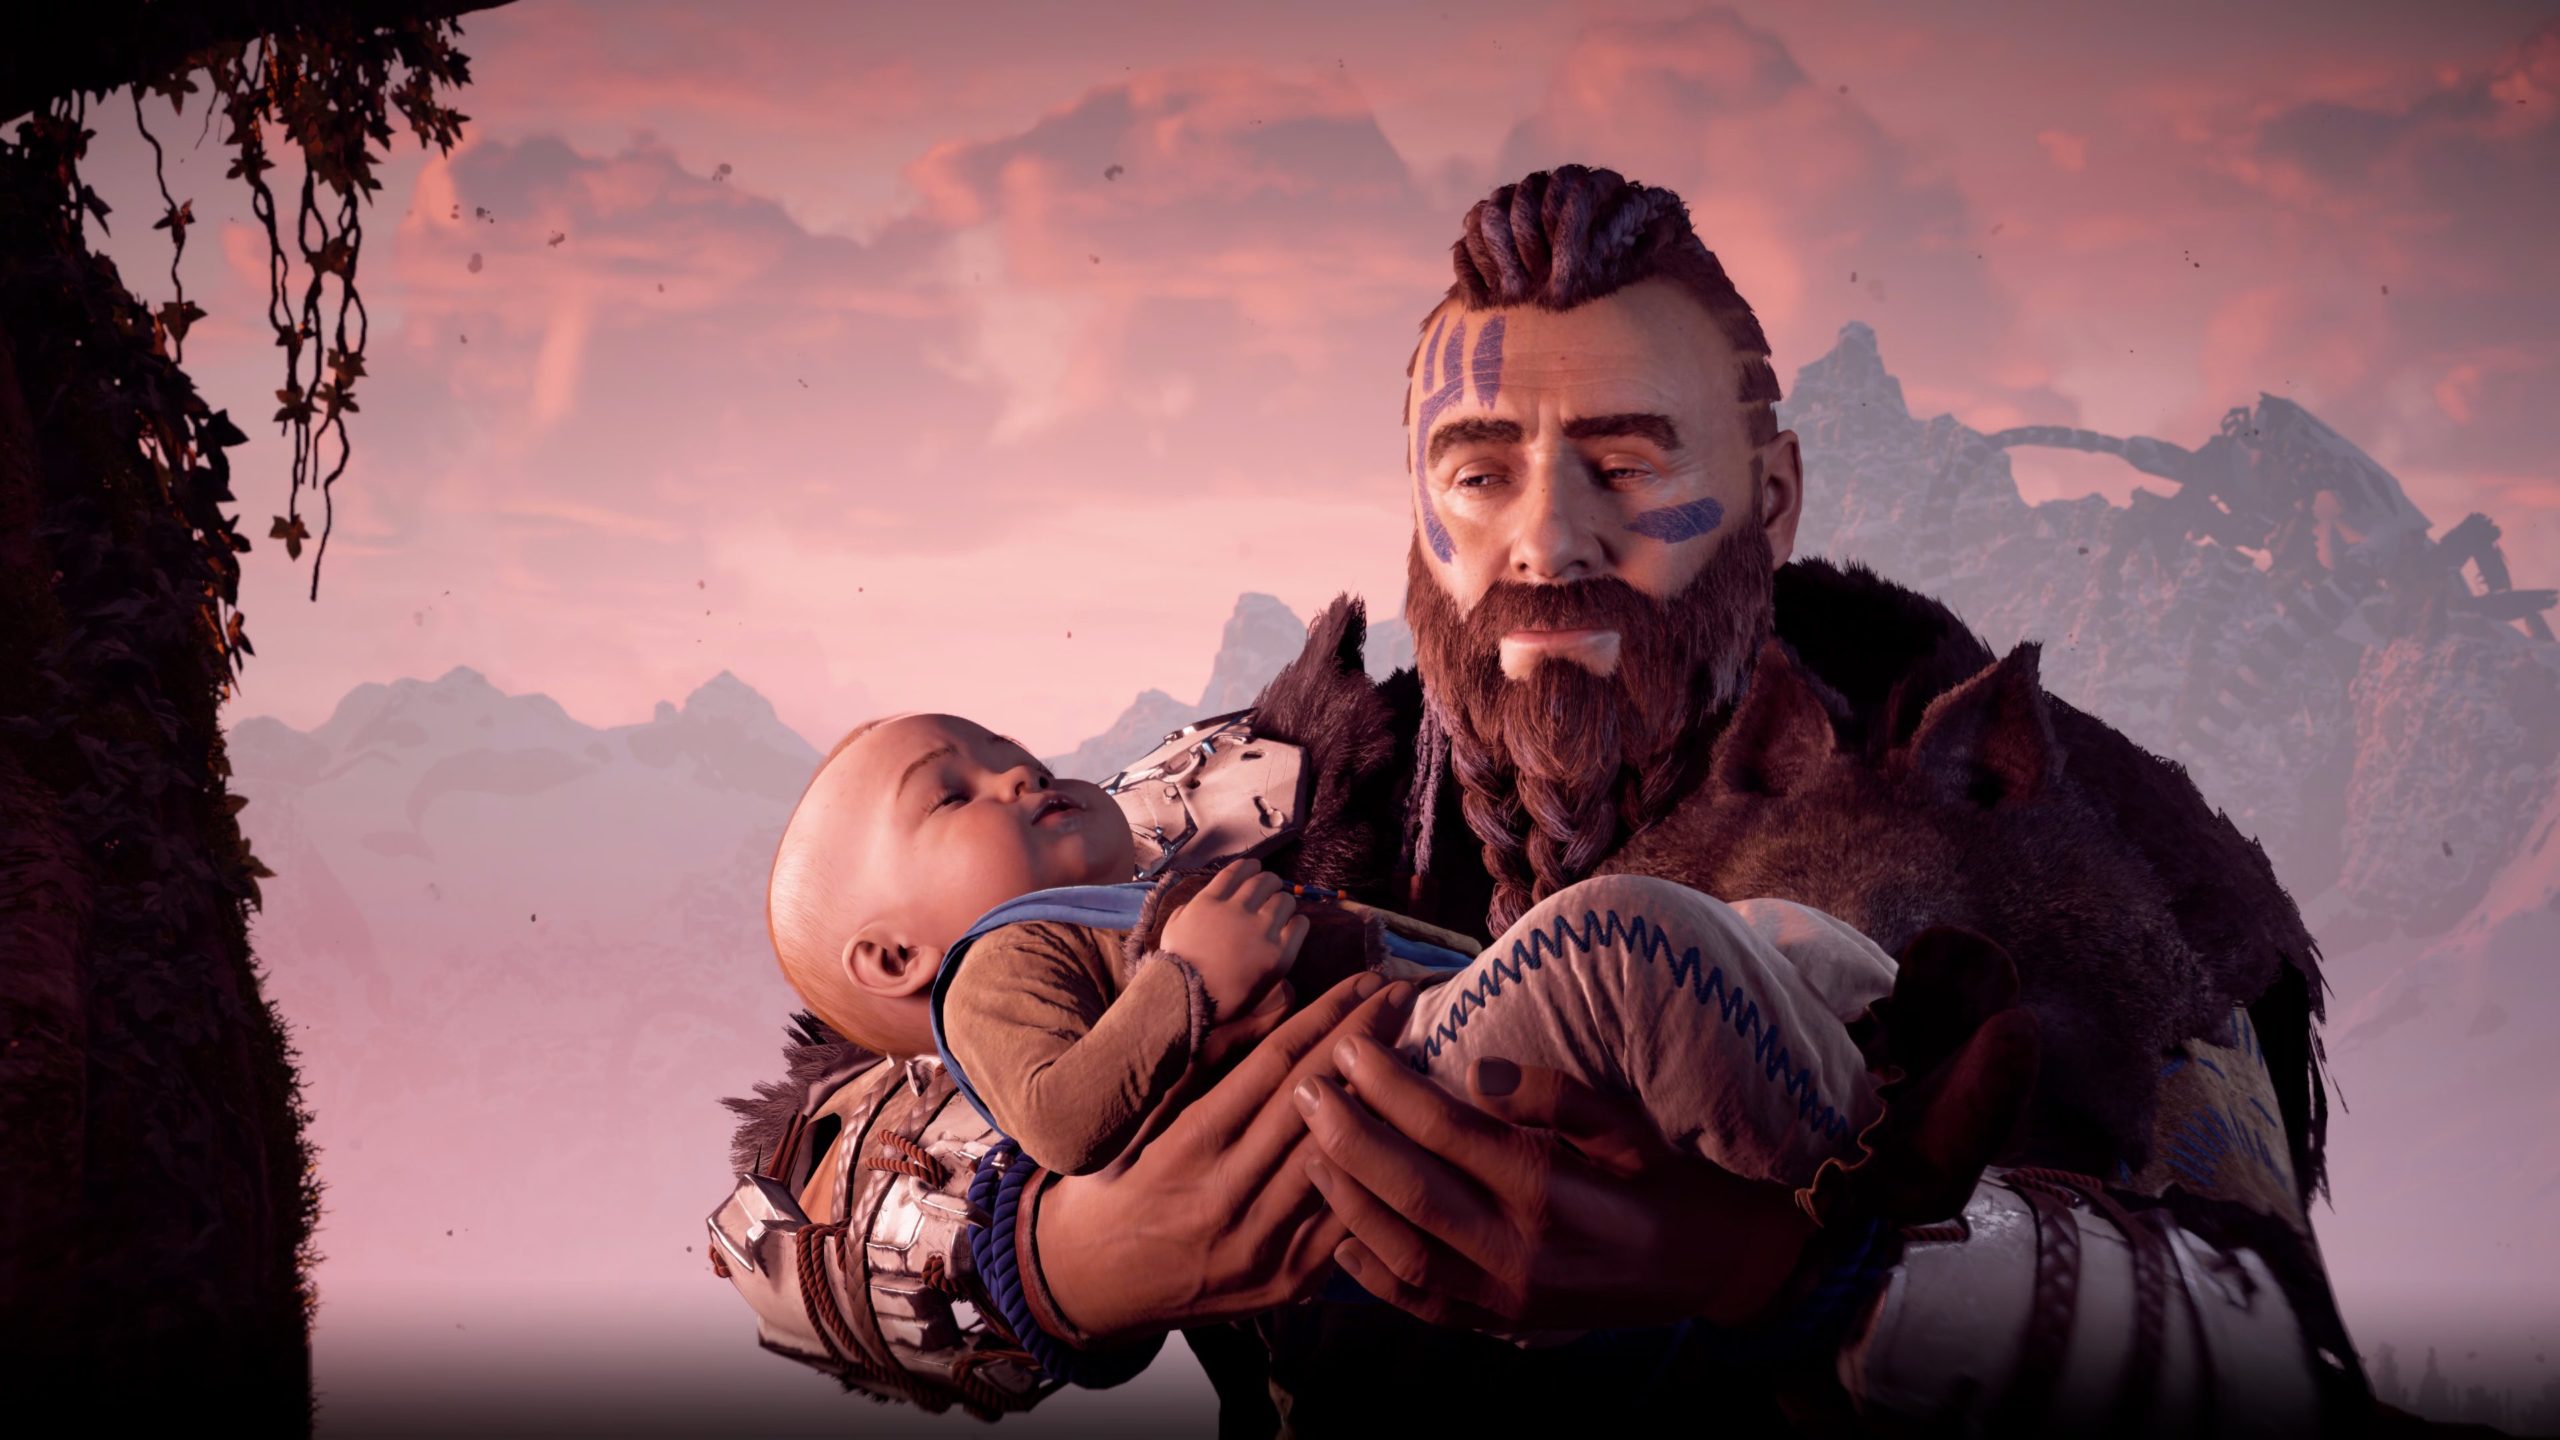 Horizon Zero Dawn Review: almost unplayable and an insult to